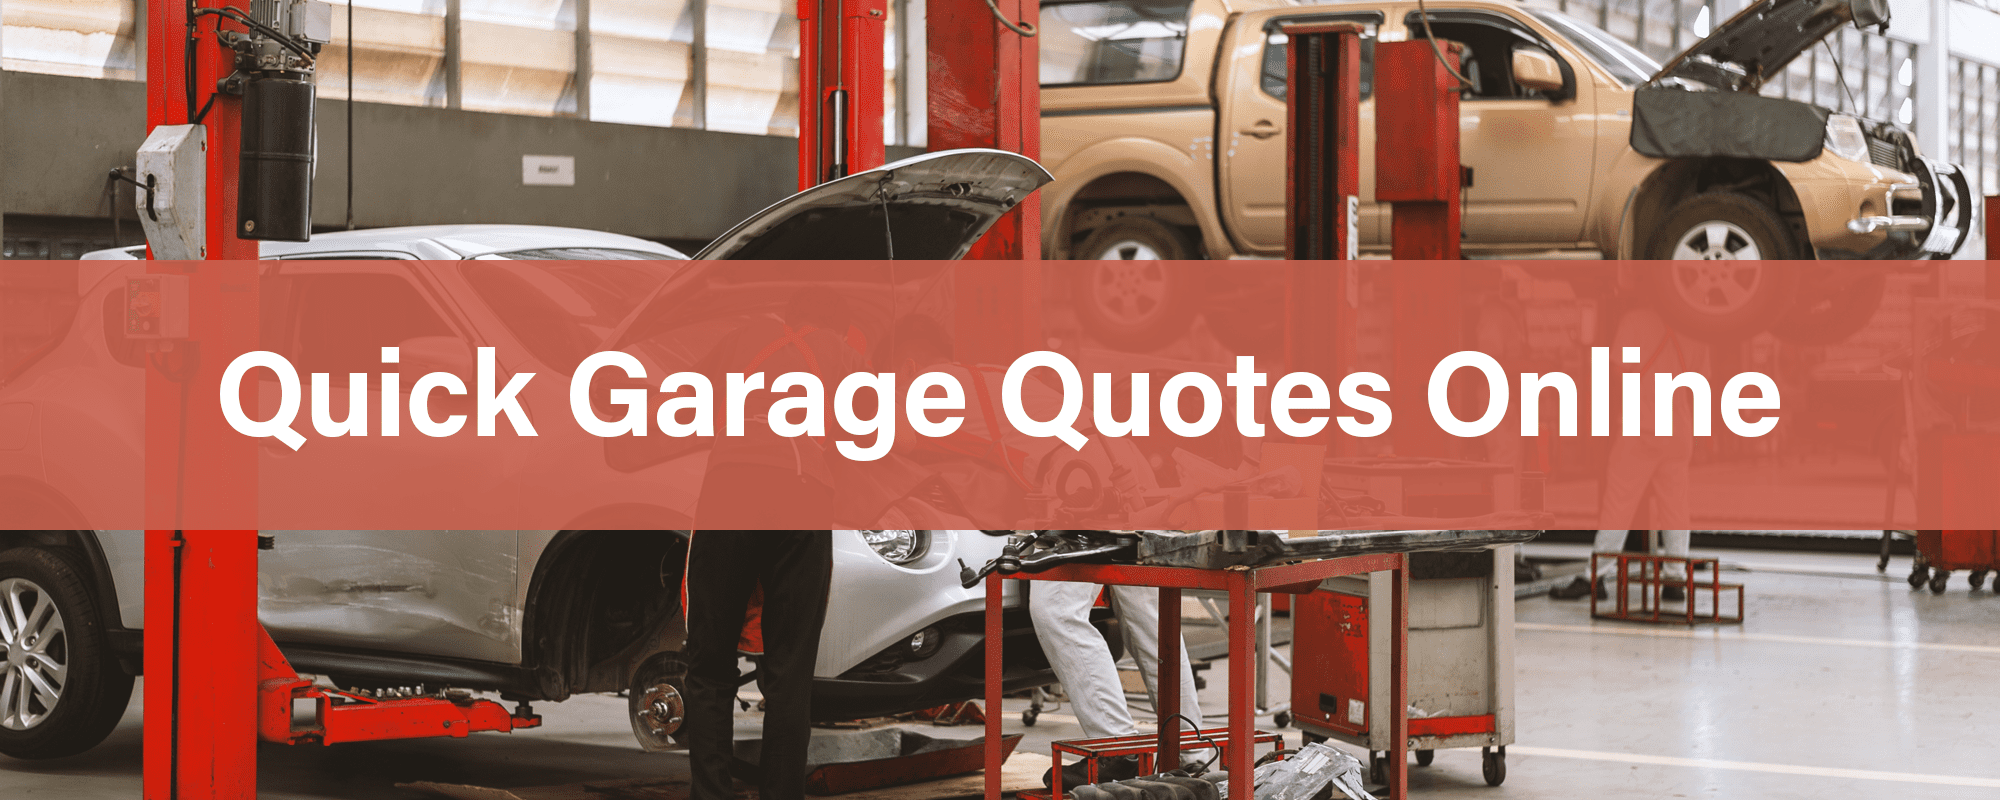 Featured image for “Quick Garage Quotes Online”